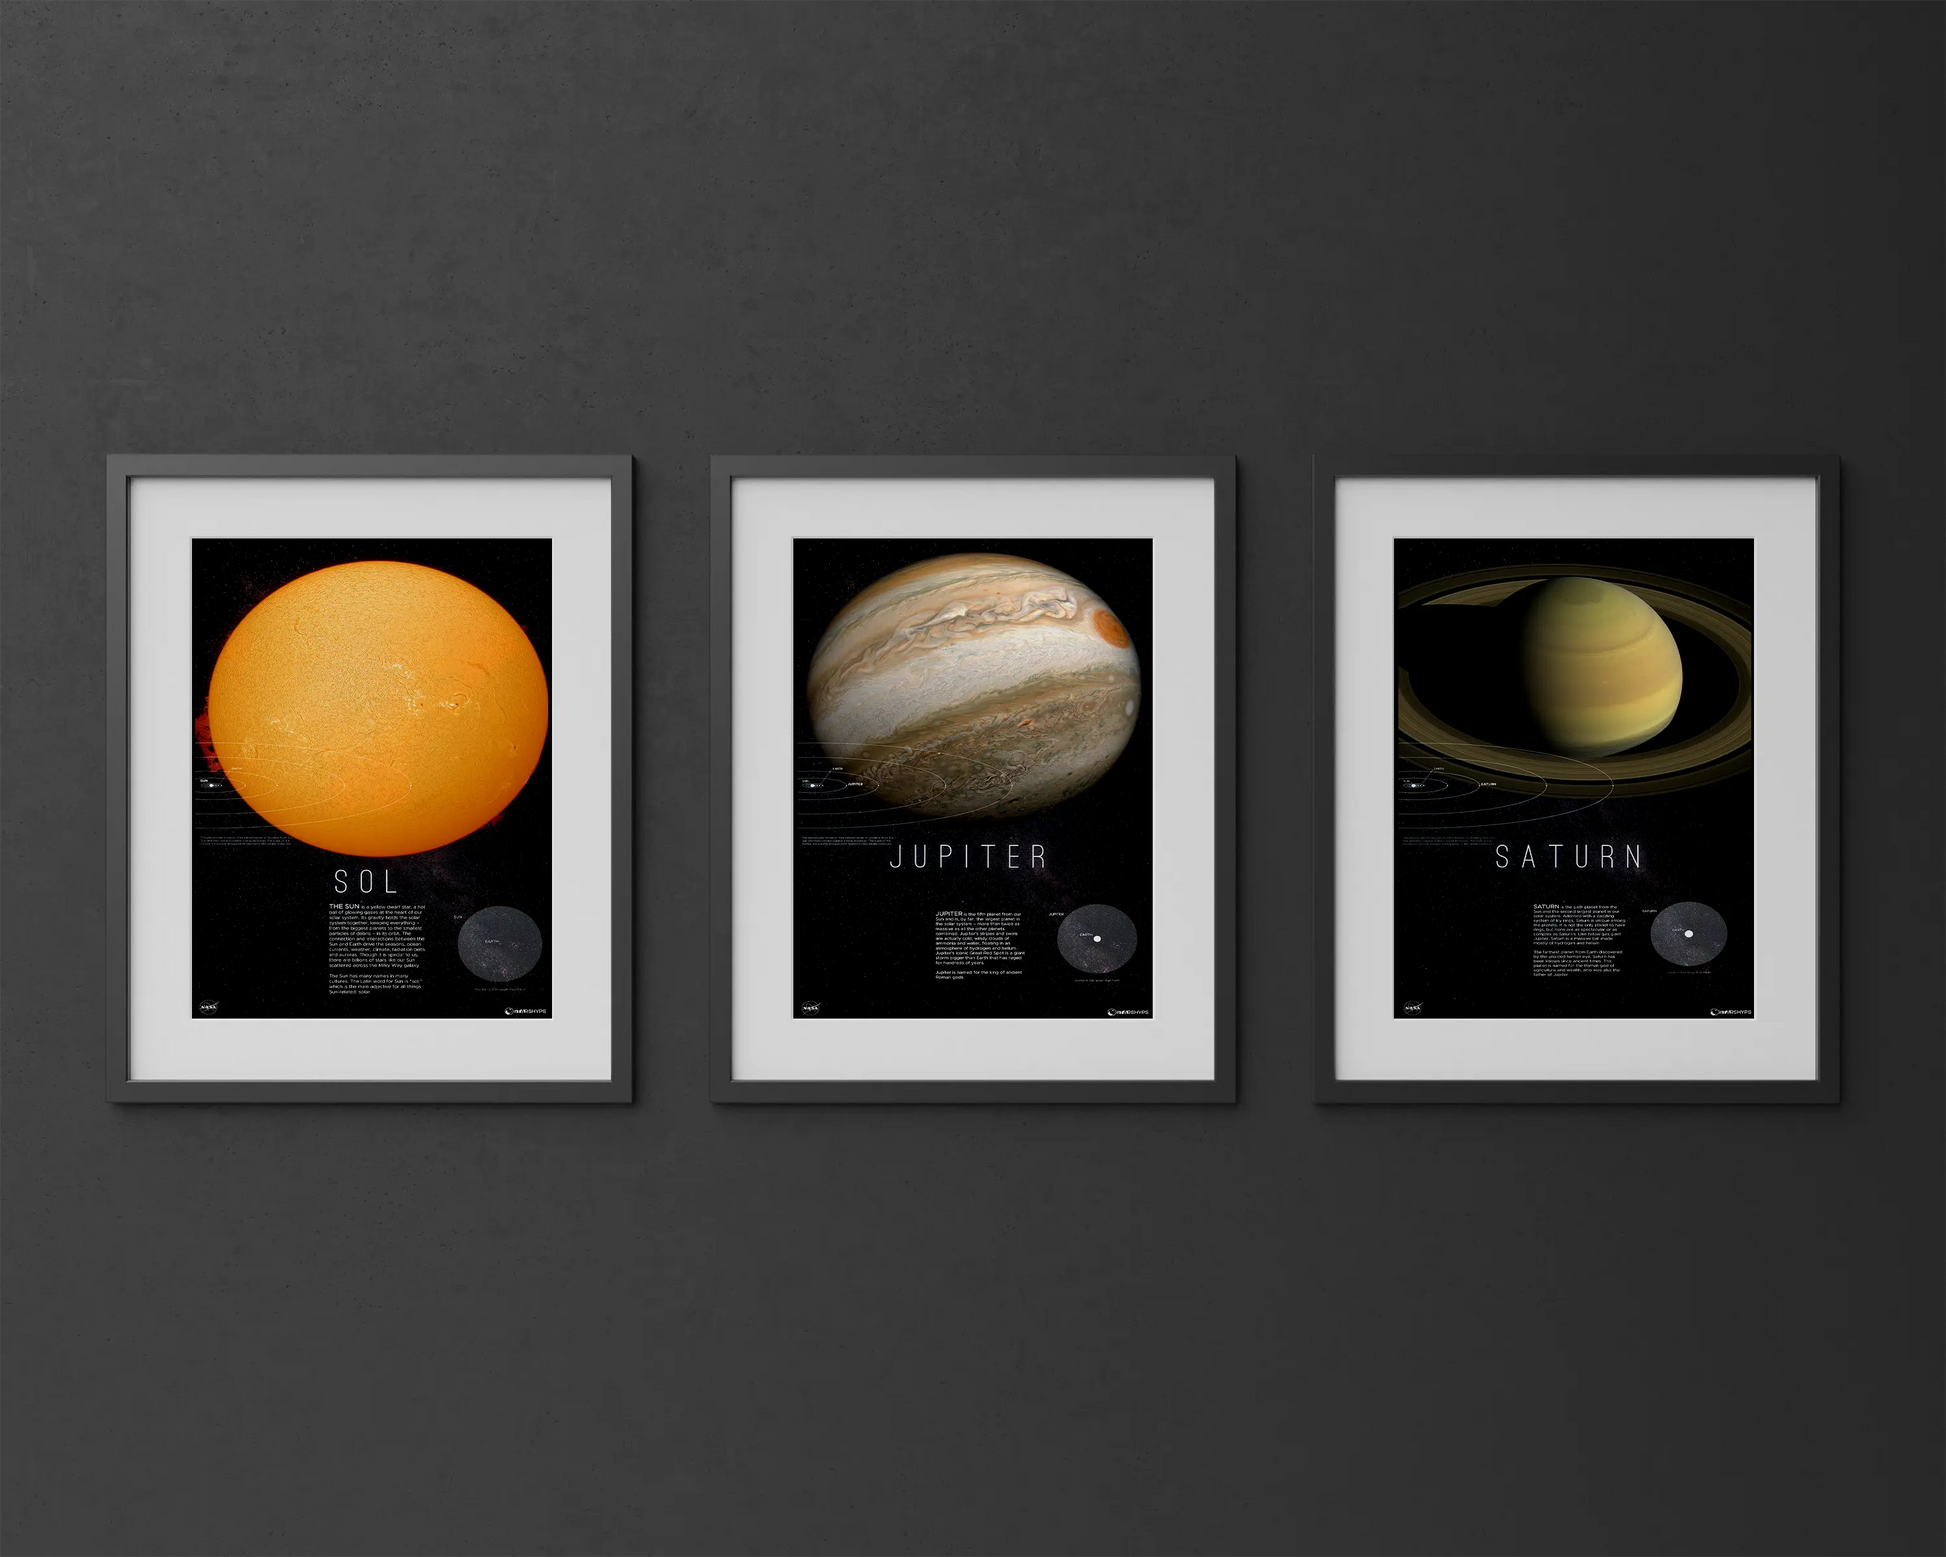 Pluto's Enigmatic Charm Decor | Pluto Print | Rocket Blueprint Posters | The image displays three framed posters on a dark background, each featuring an image and description of the Sun, Jupiter, and Saturn, with their names prominently labeled below the images.